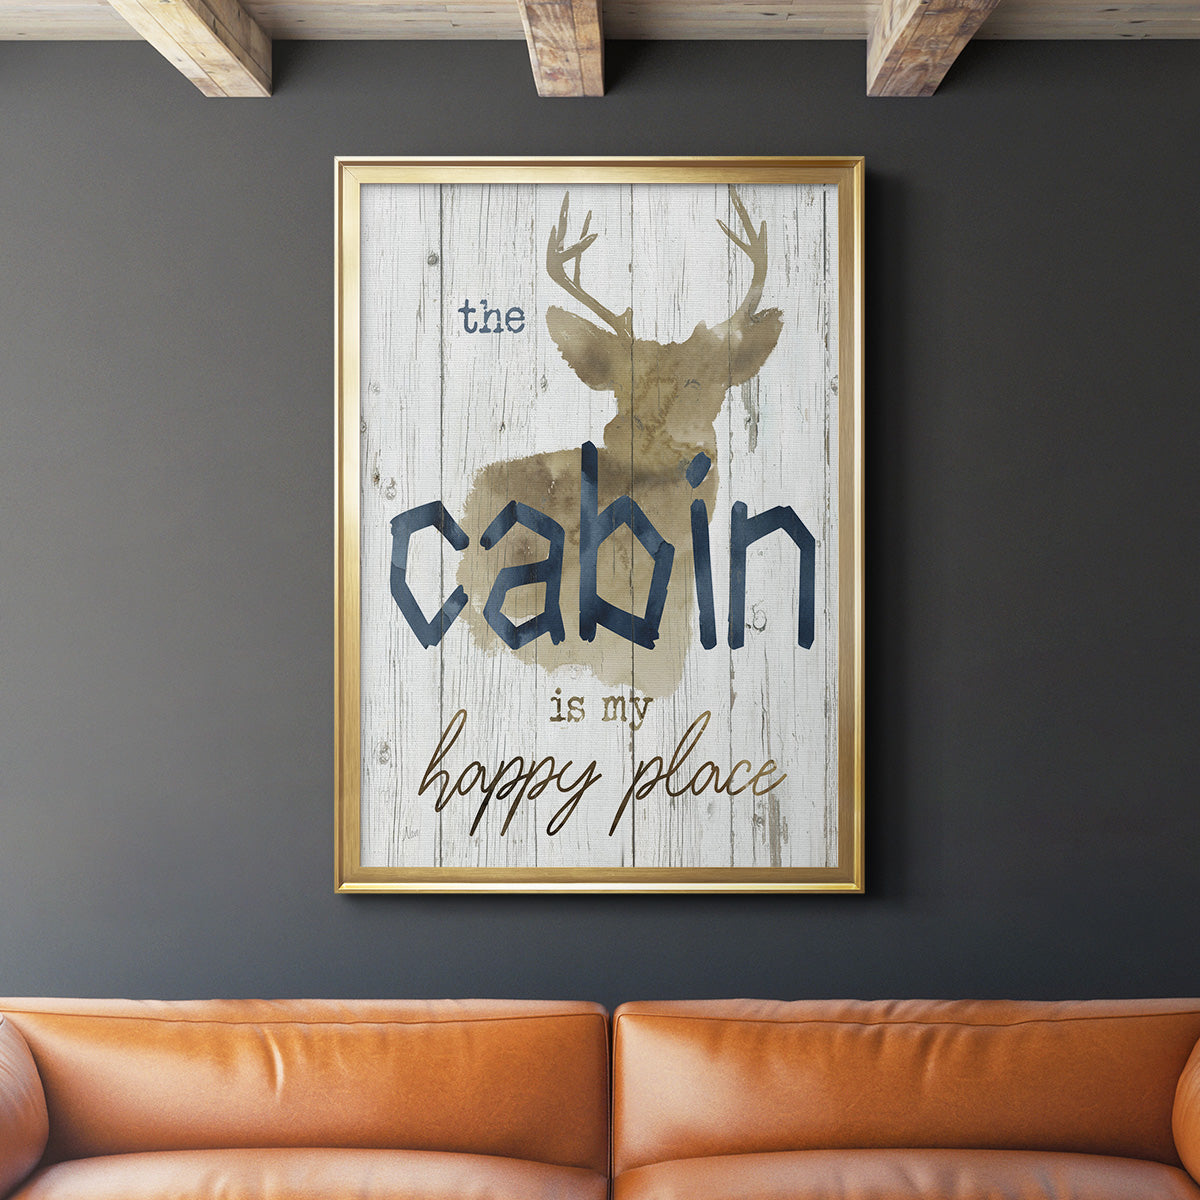 Happy Place Cabin Premium Framed Print - Ready to Hang